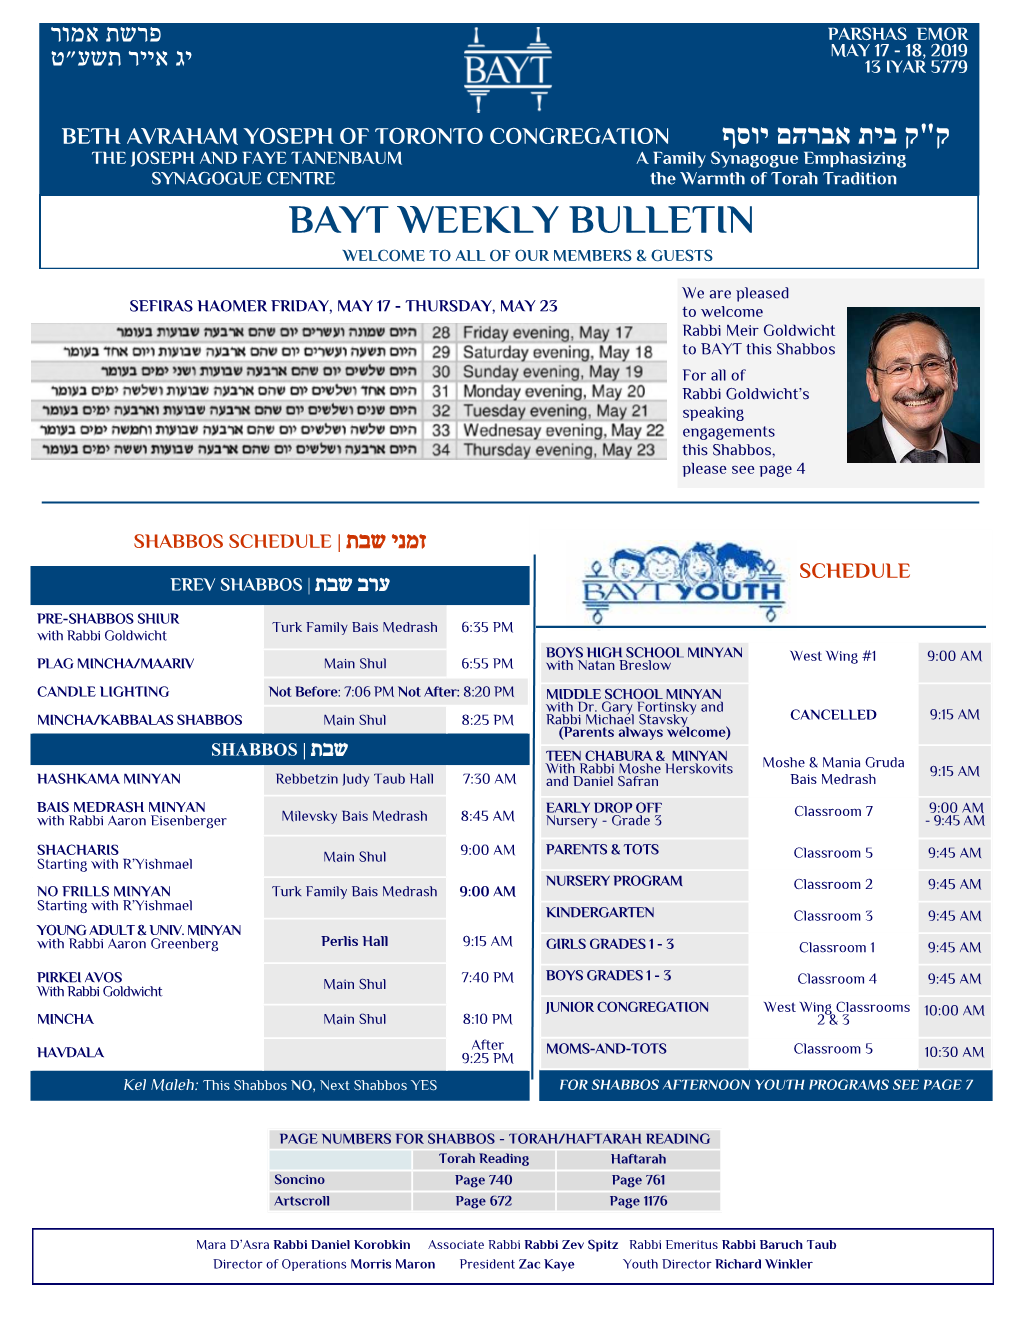 Bayt Weekly Bulletin Welcome to All of Our Members & Guests